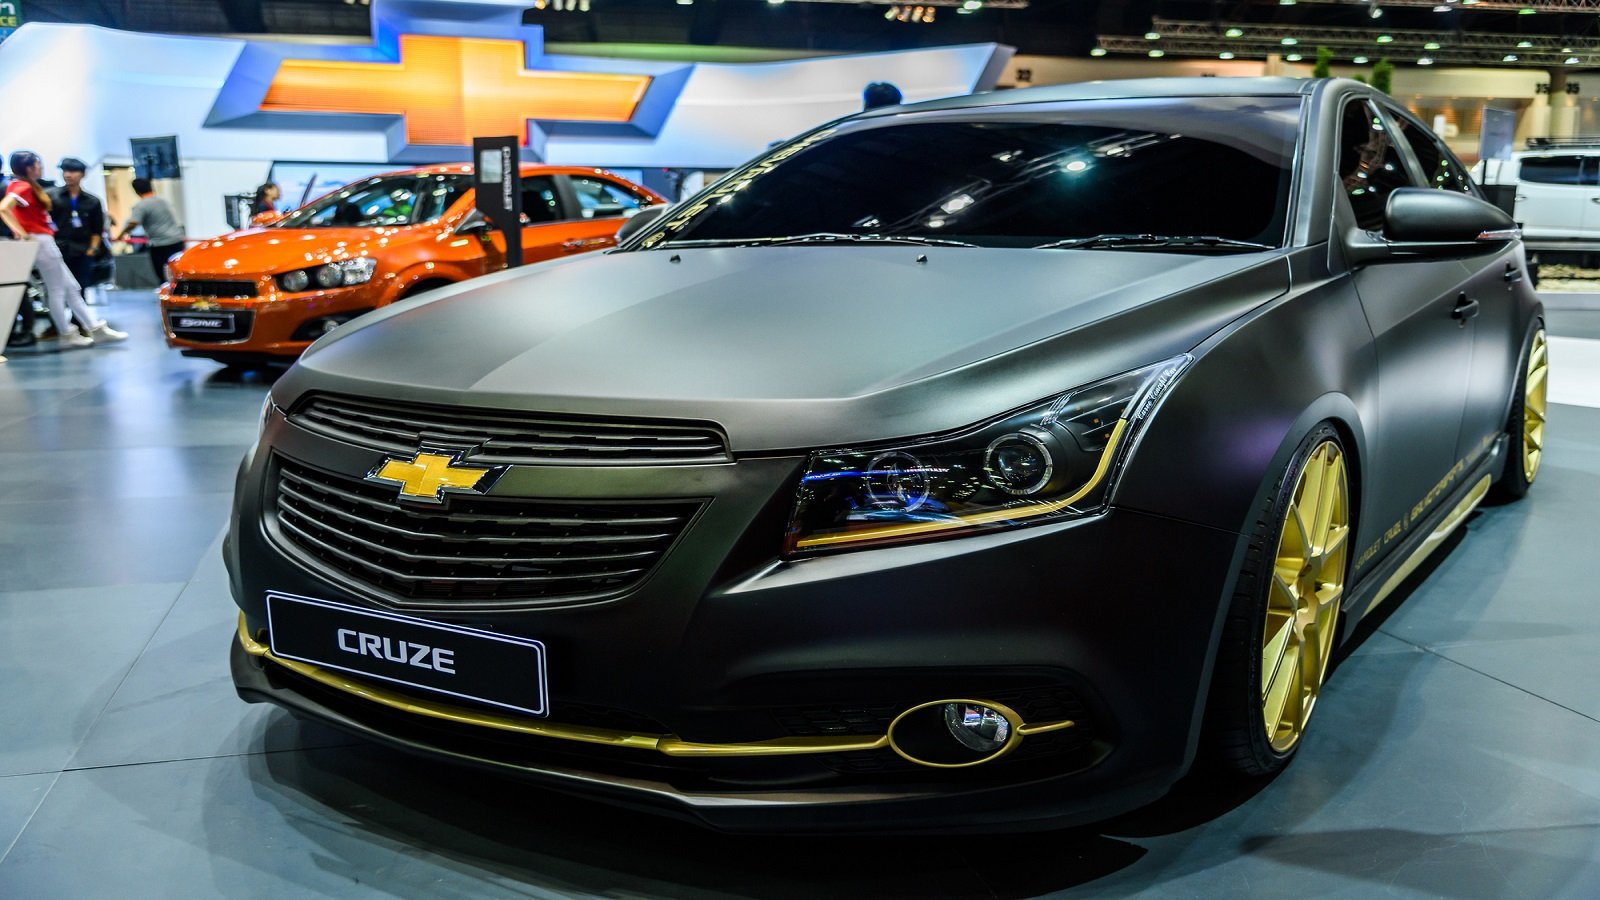 <p>The <strong>Chevrolet Cruze</strong> has had its share of problems, especially in the 2011 to early 2016 model years. Issues with the cooling system and leaks were common during that time. However, newer models, starting from 2016, have seen improvements in overall reliability.</p>